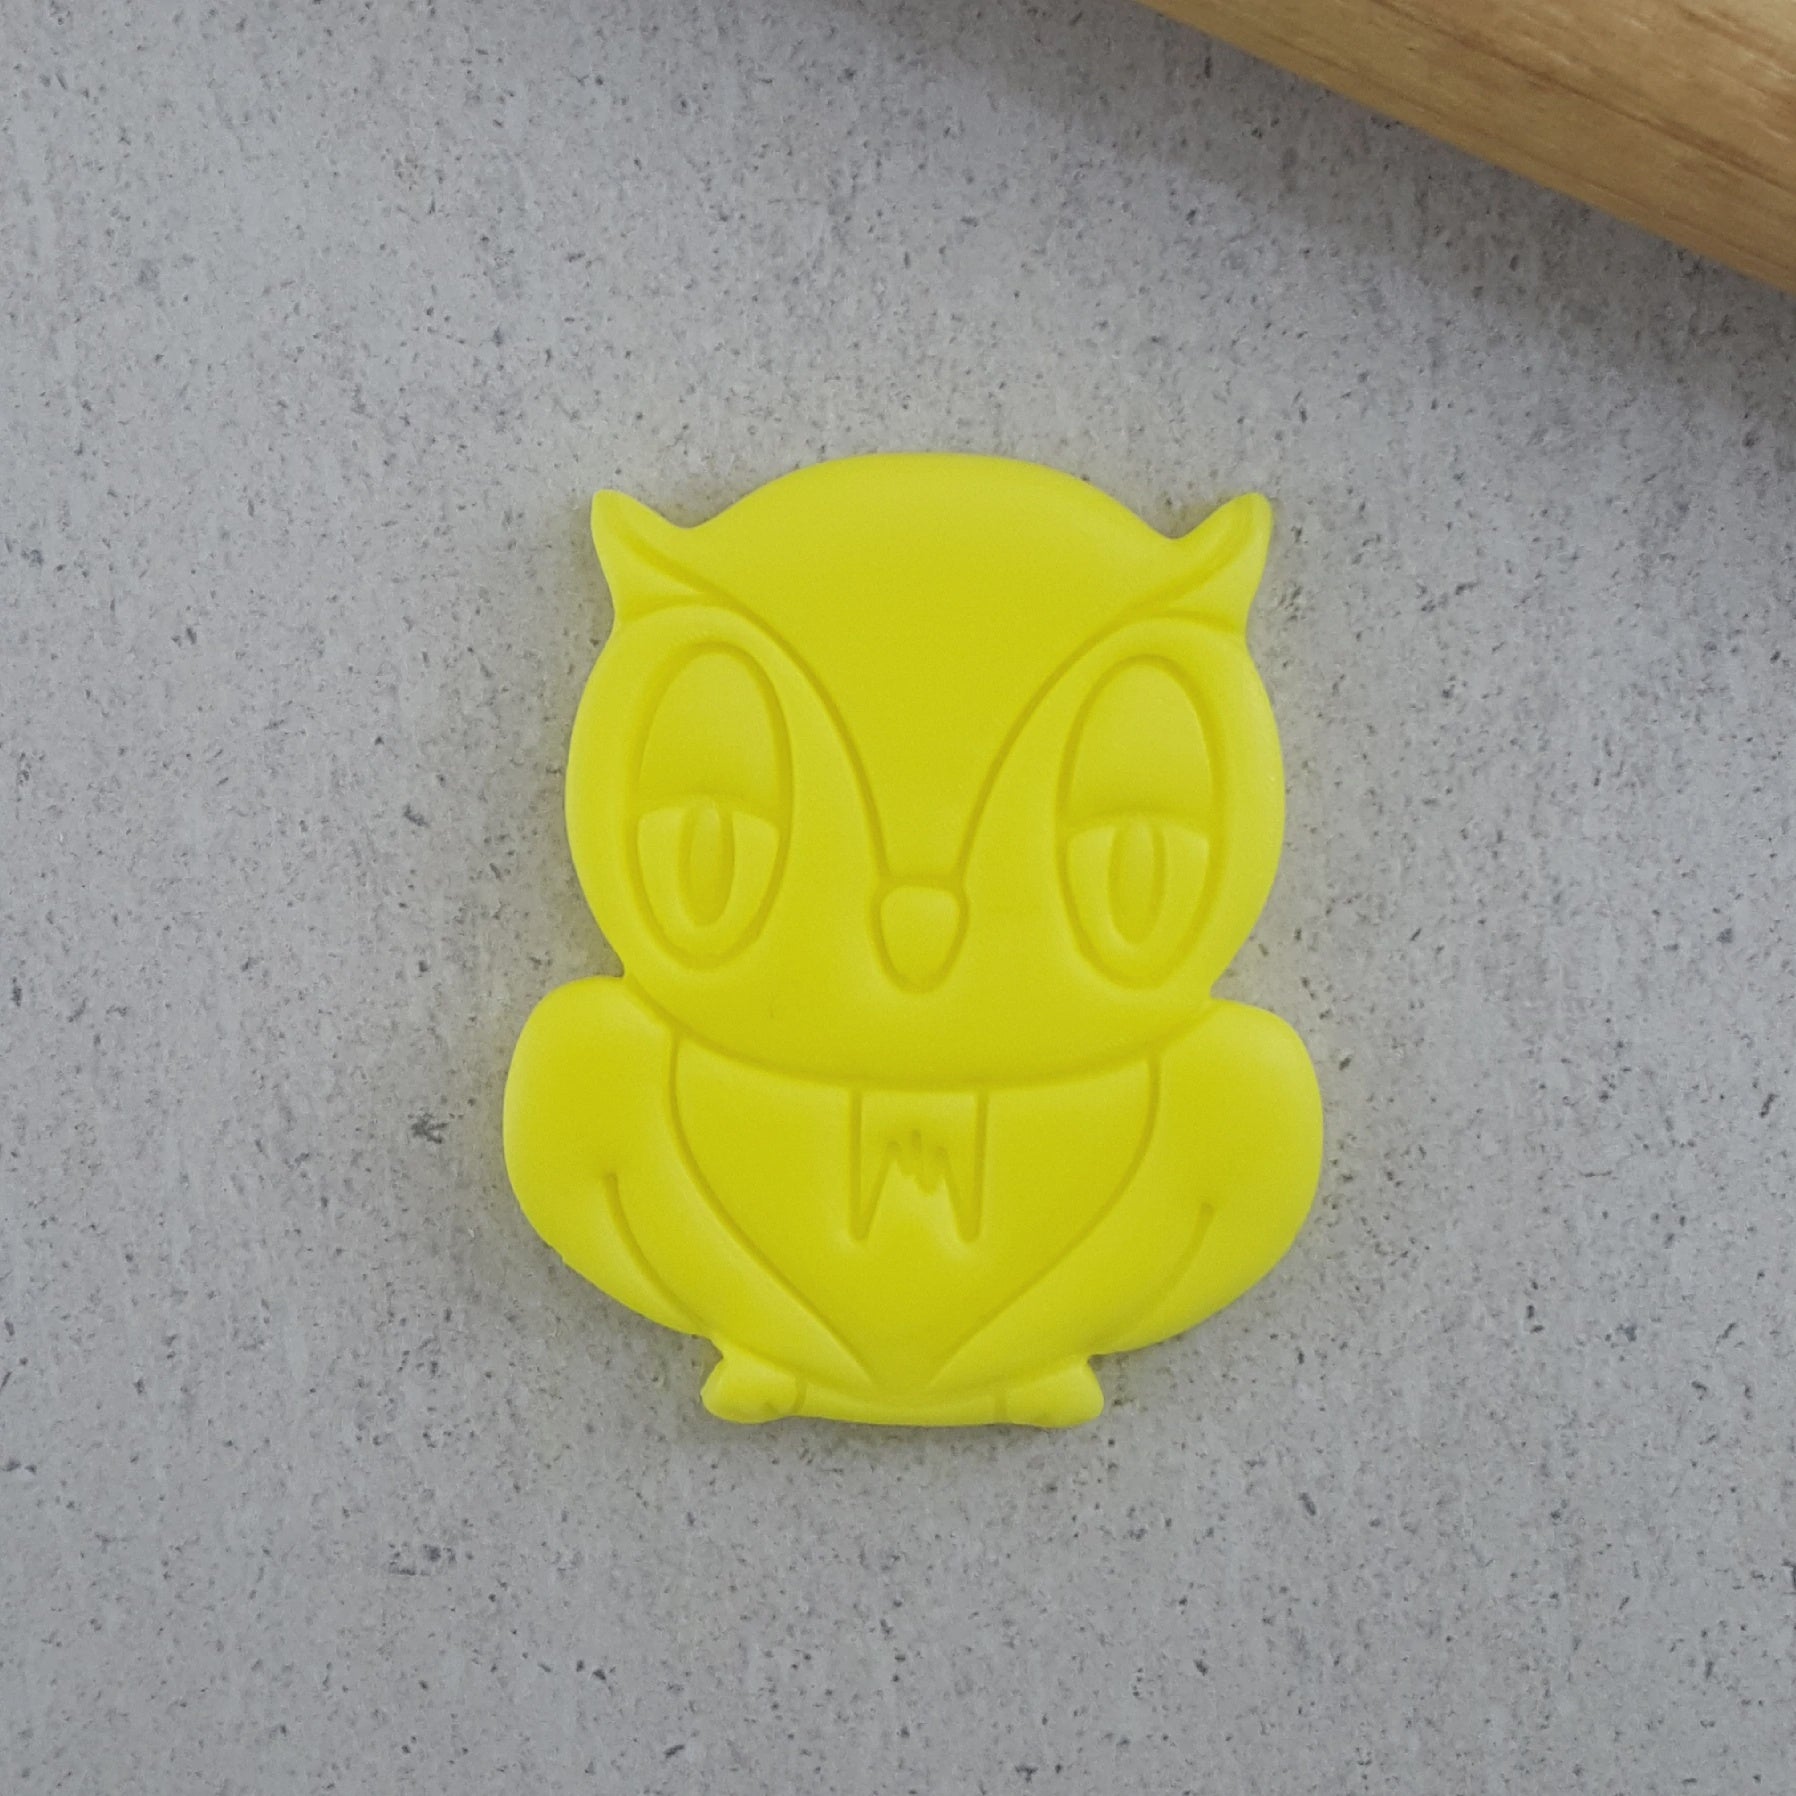 Custom Cookie Cutters Owl Cutter and Embosser Set